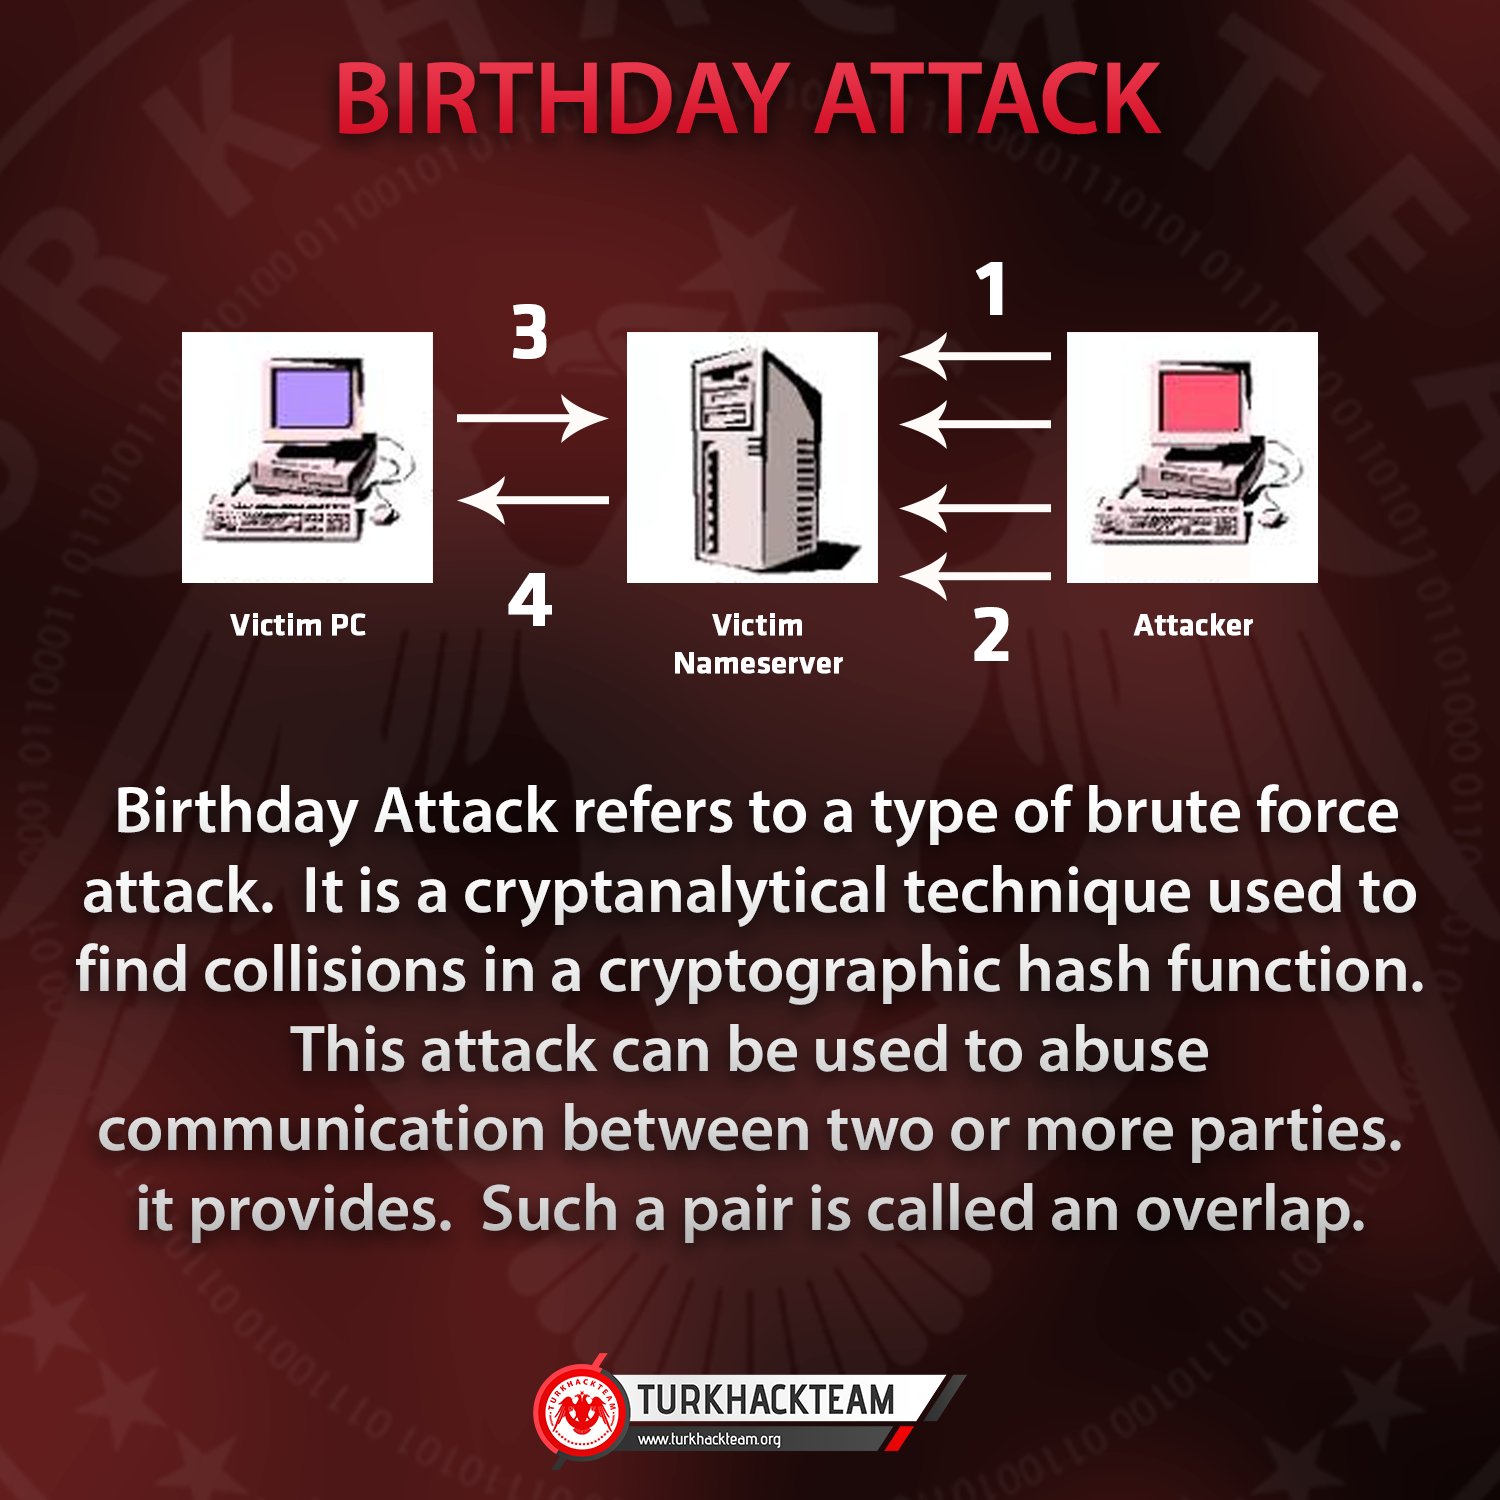 TurkHackTeam EN on X: "Birthday attack❗ #cybersecurity #cyberattack #data # attack #attacker #system #network #bruteforce #crypto #files #cybercrime #turkhackteam https://t.co/JdHn6is81W" / X